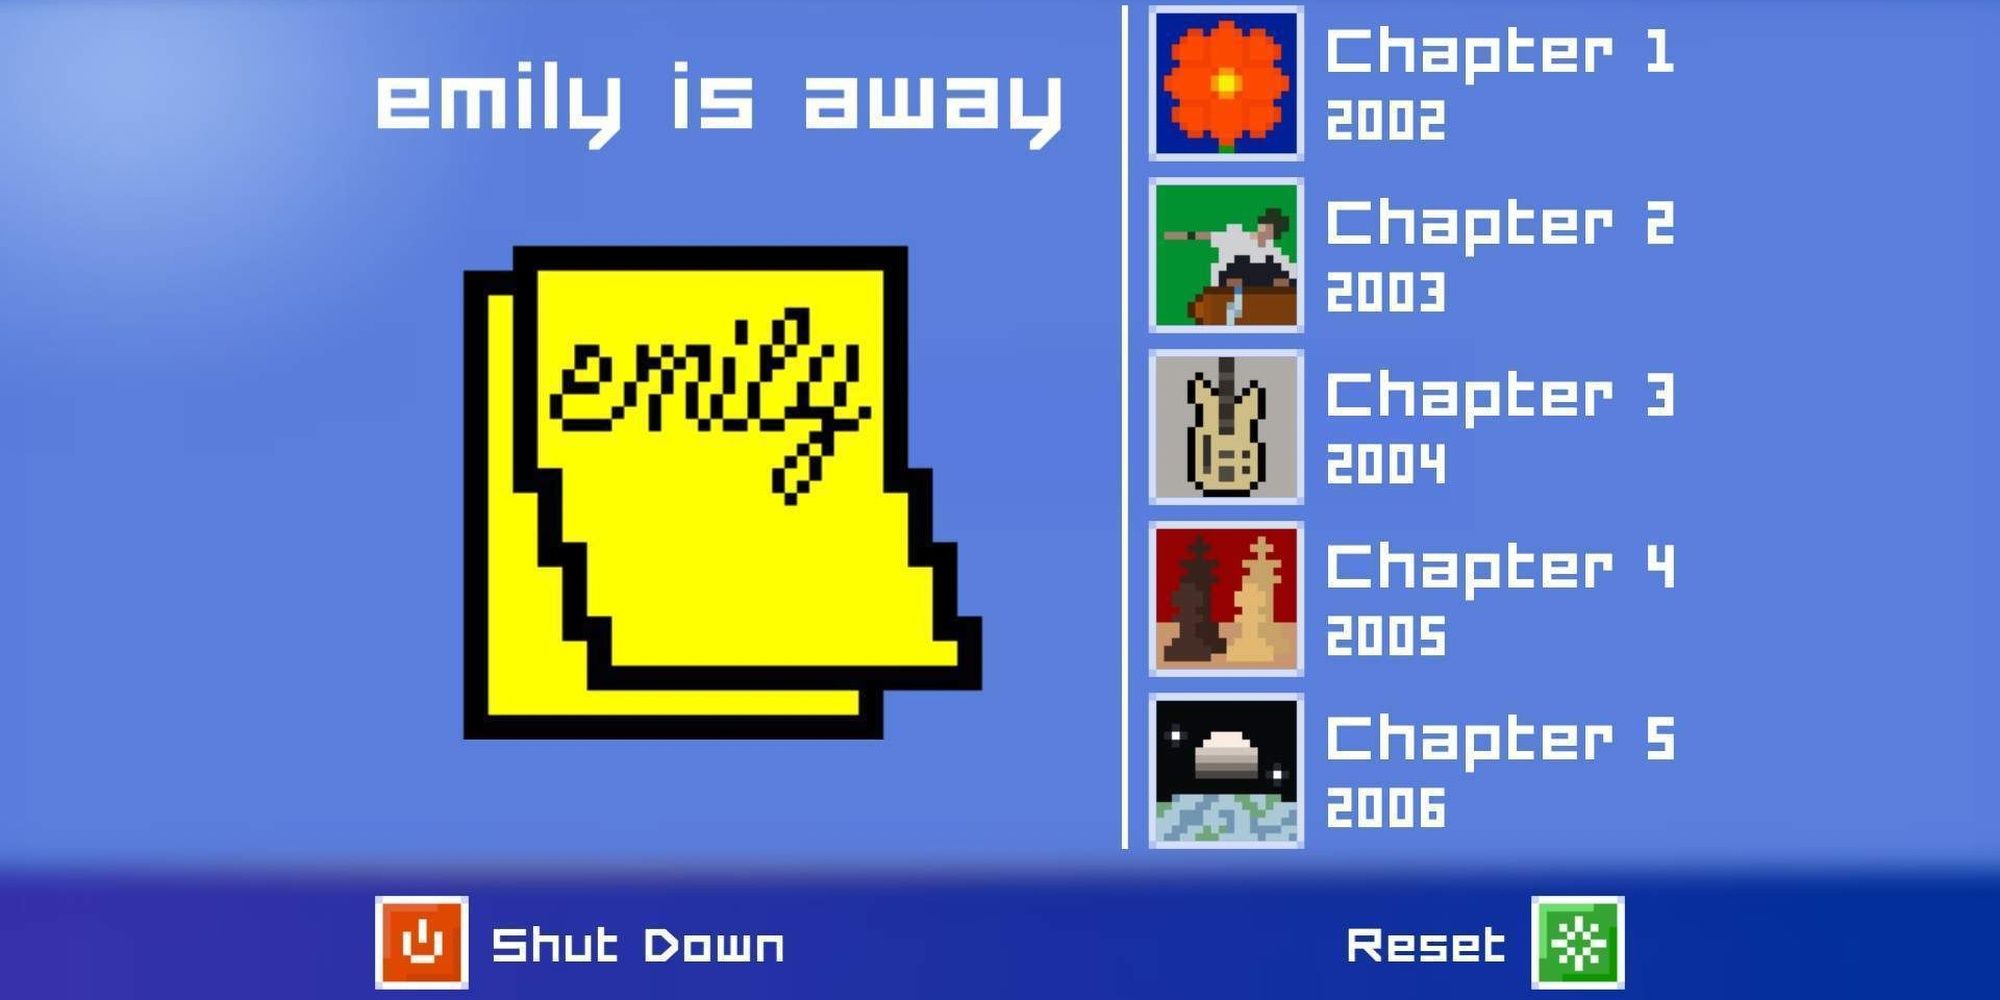 Chapter selection screen for Emily Is Away